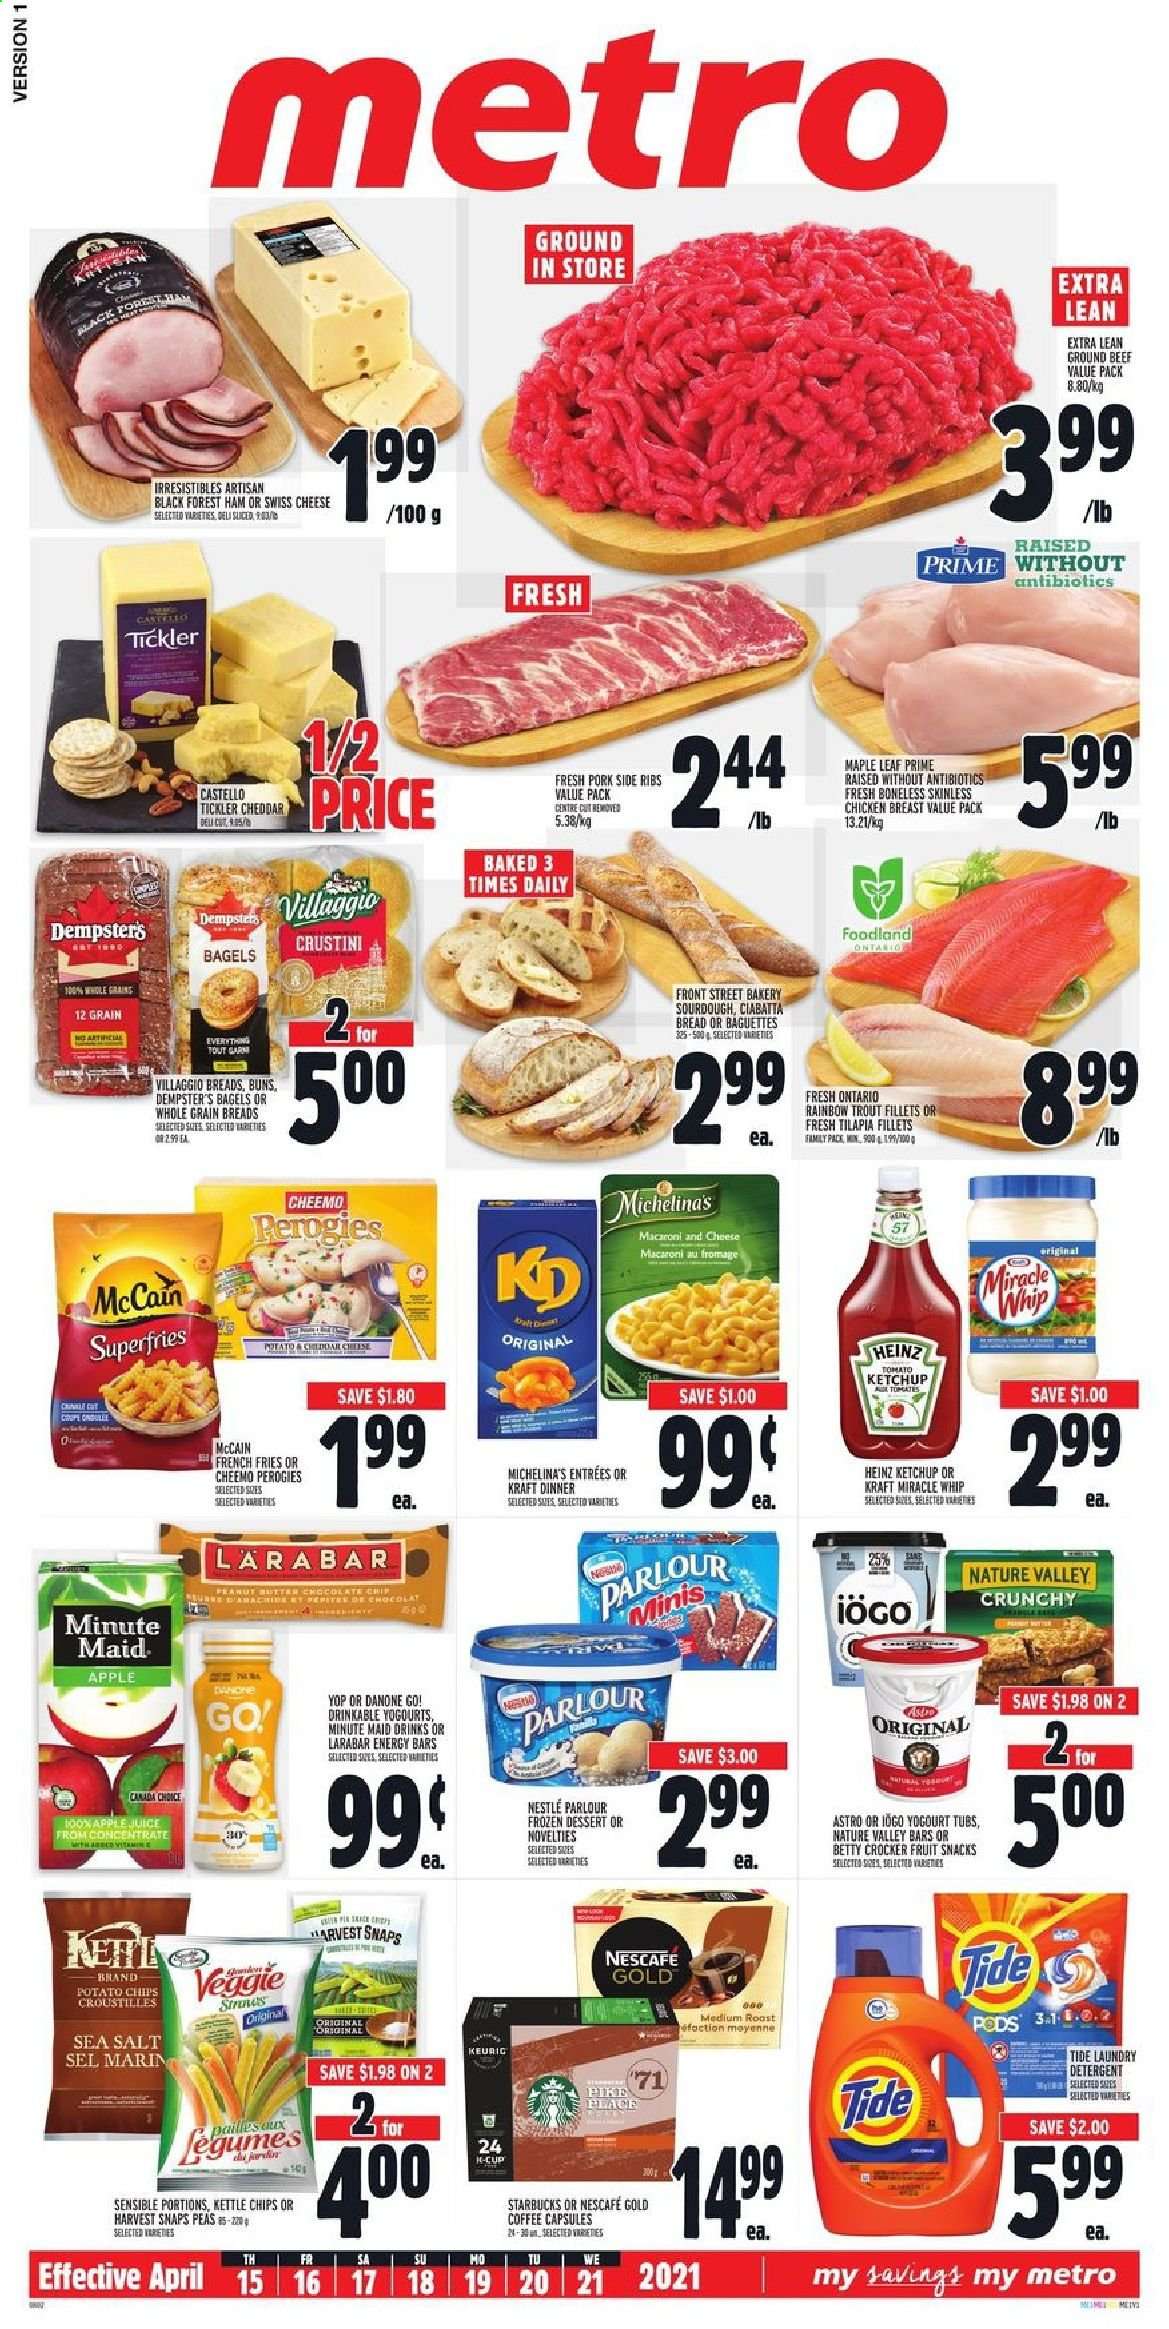 thumbnail - Metro Flyer - April 15, 2021 - April 21, 2021 - Sales products - bagels, bread, buns, peas, tilapia, trout, macaroni & cheese, Kraft®, ham, swiss cheese, Miracle Whip, McCain, potato fries, french fries, fruit snack, potato chips, Harvest Snaps, Heinz, energy bar, Nature Valley, apple juice, juice, fruit punch, coffee, coffee capsules, Starbucks, chicken breasts, chicken, beef meat, ground beef, Tide, slicer, pin, Go!, Danone, Nestlé, Nescafé. Page 1.